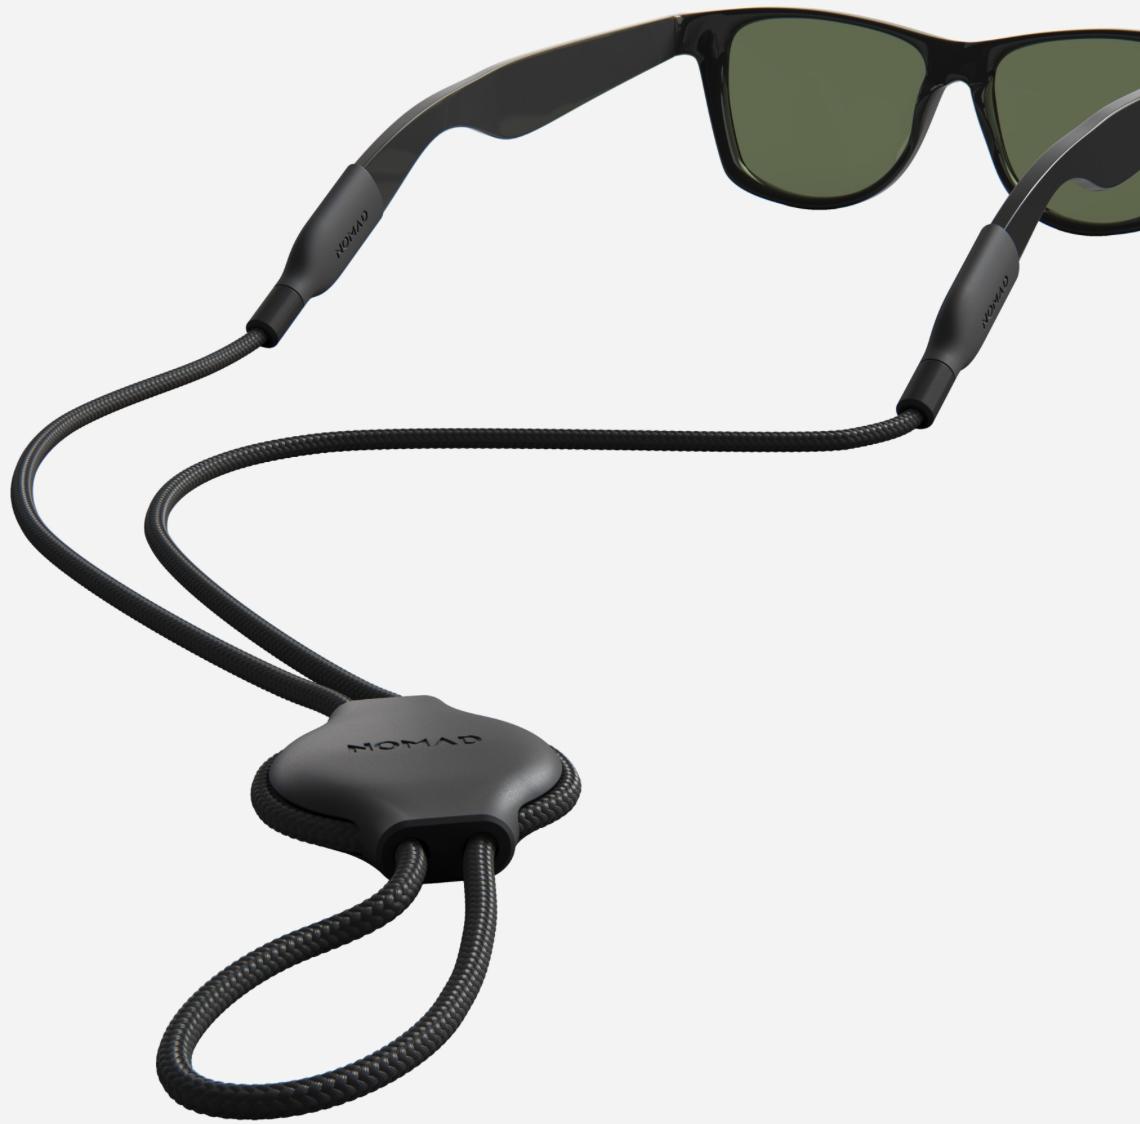 Nomad Glasses Strap For Airtag Render Cropped